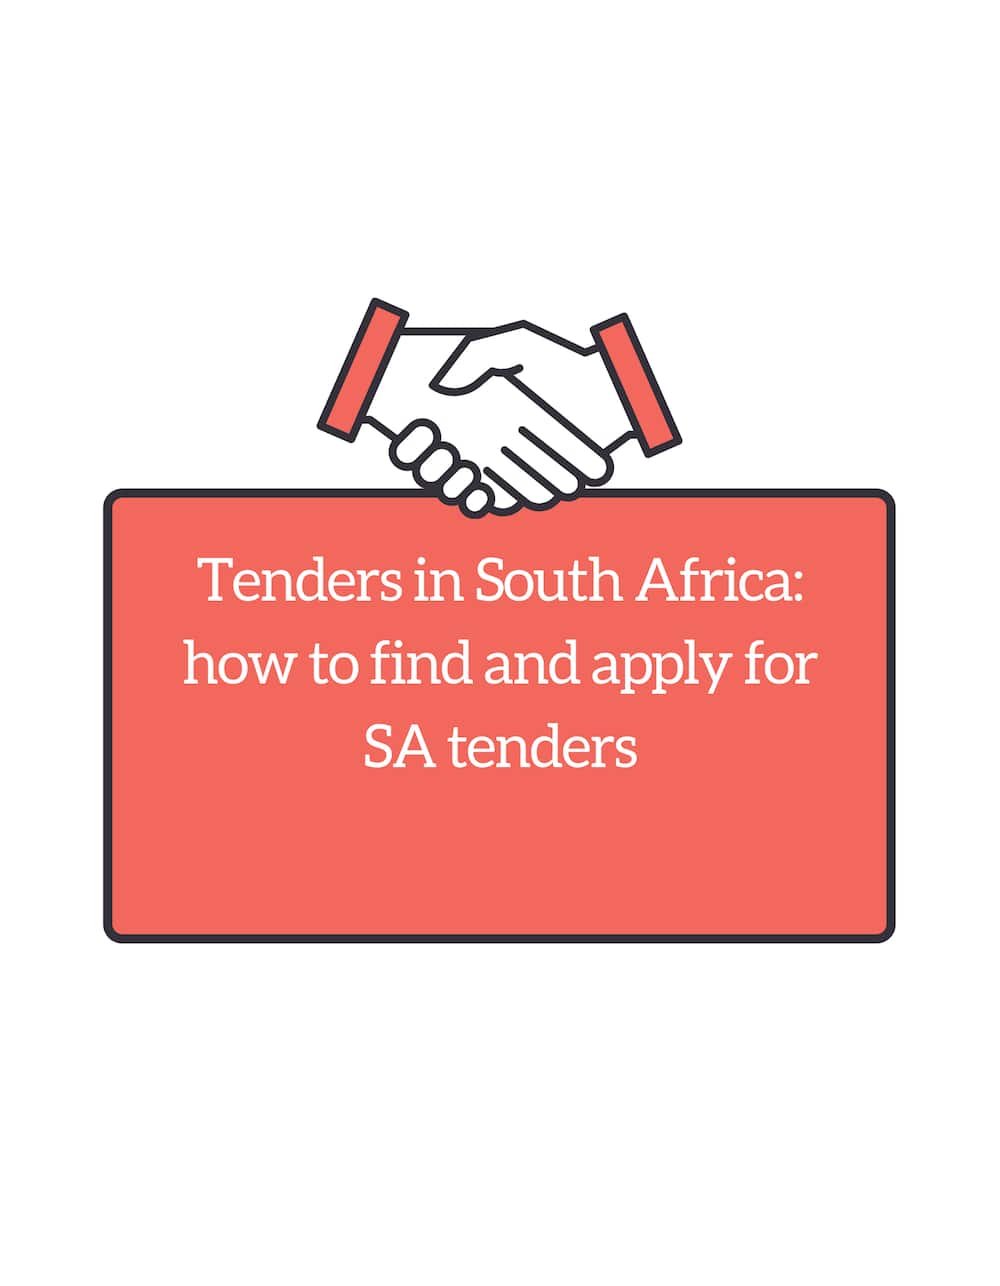 Tenders in South Africa: how to find and apply for SA tenders